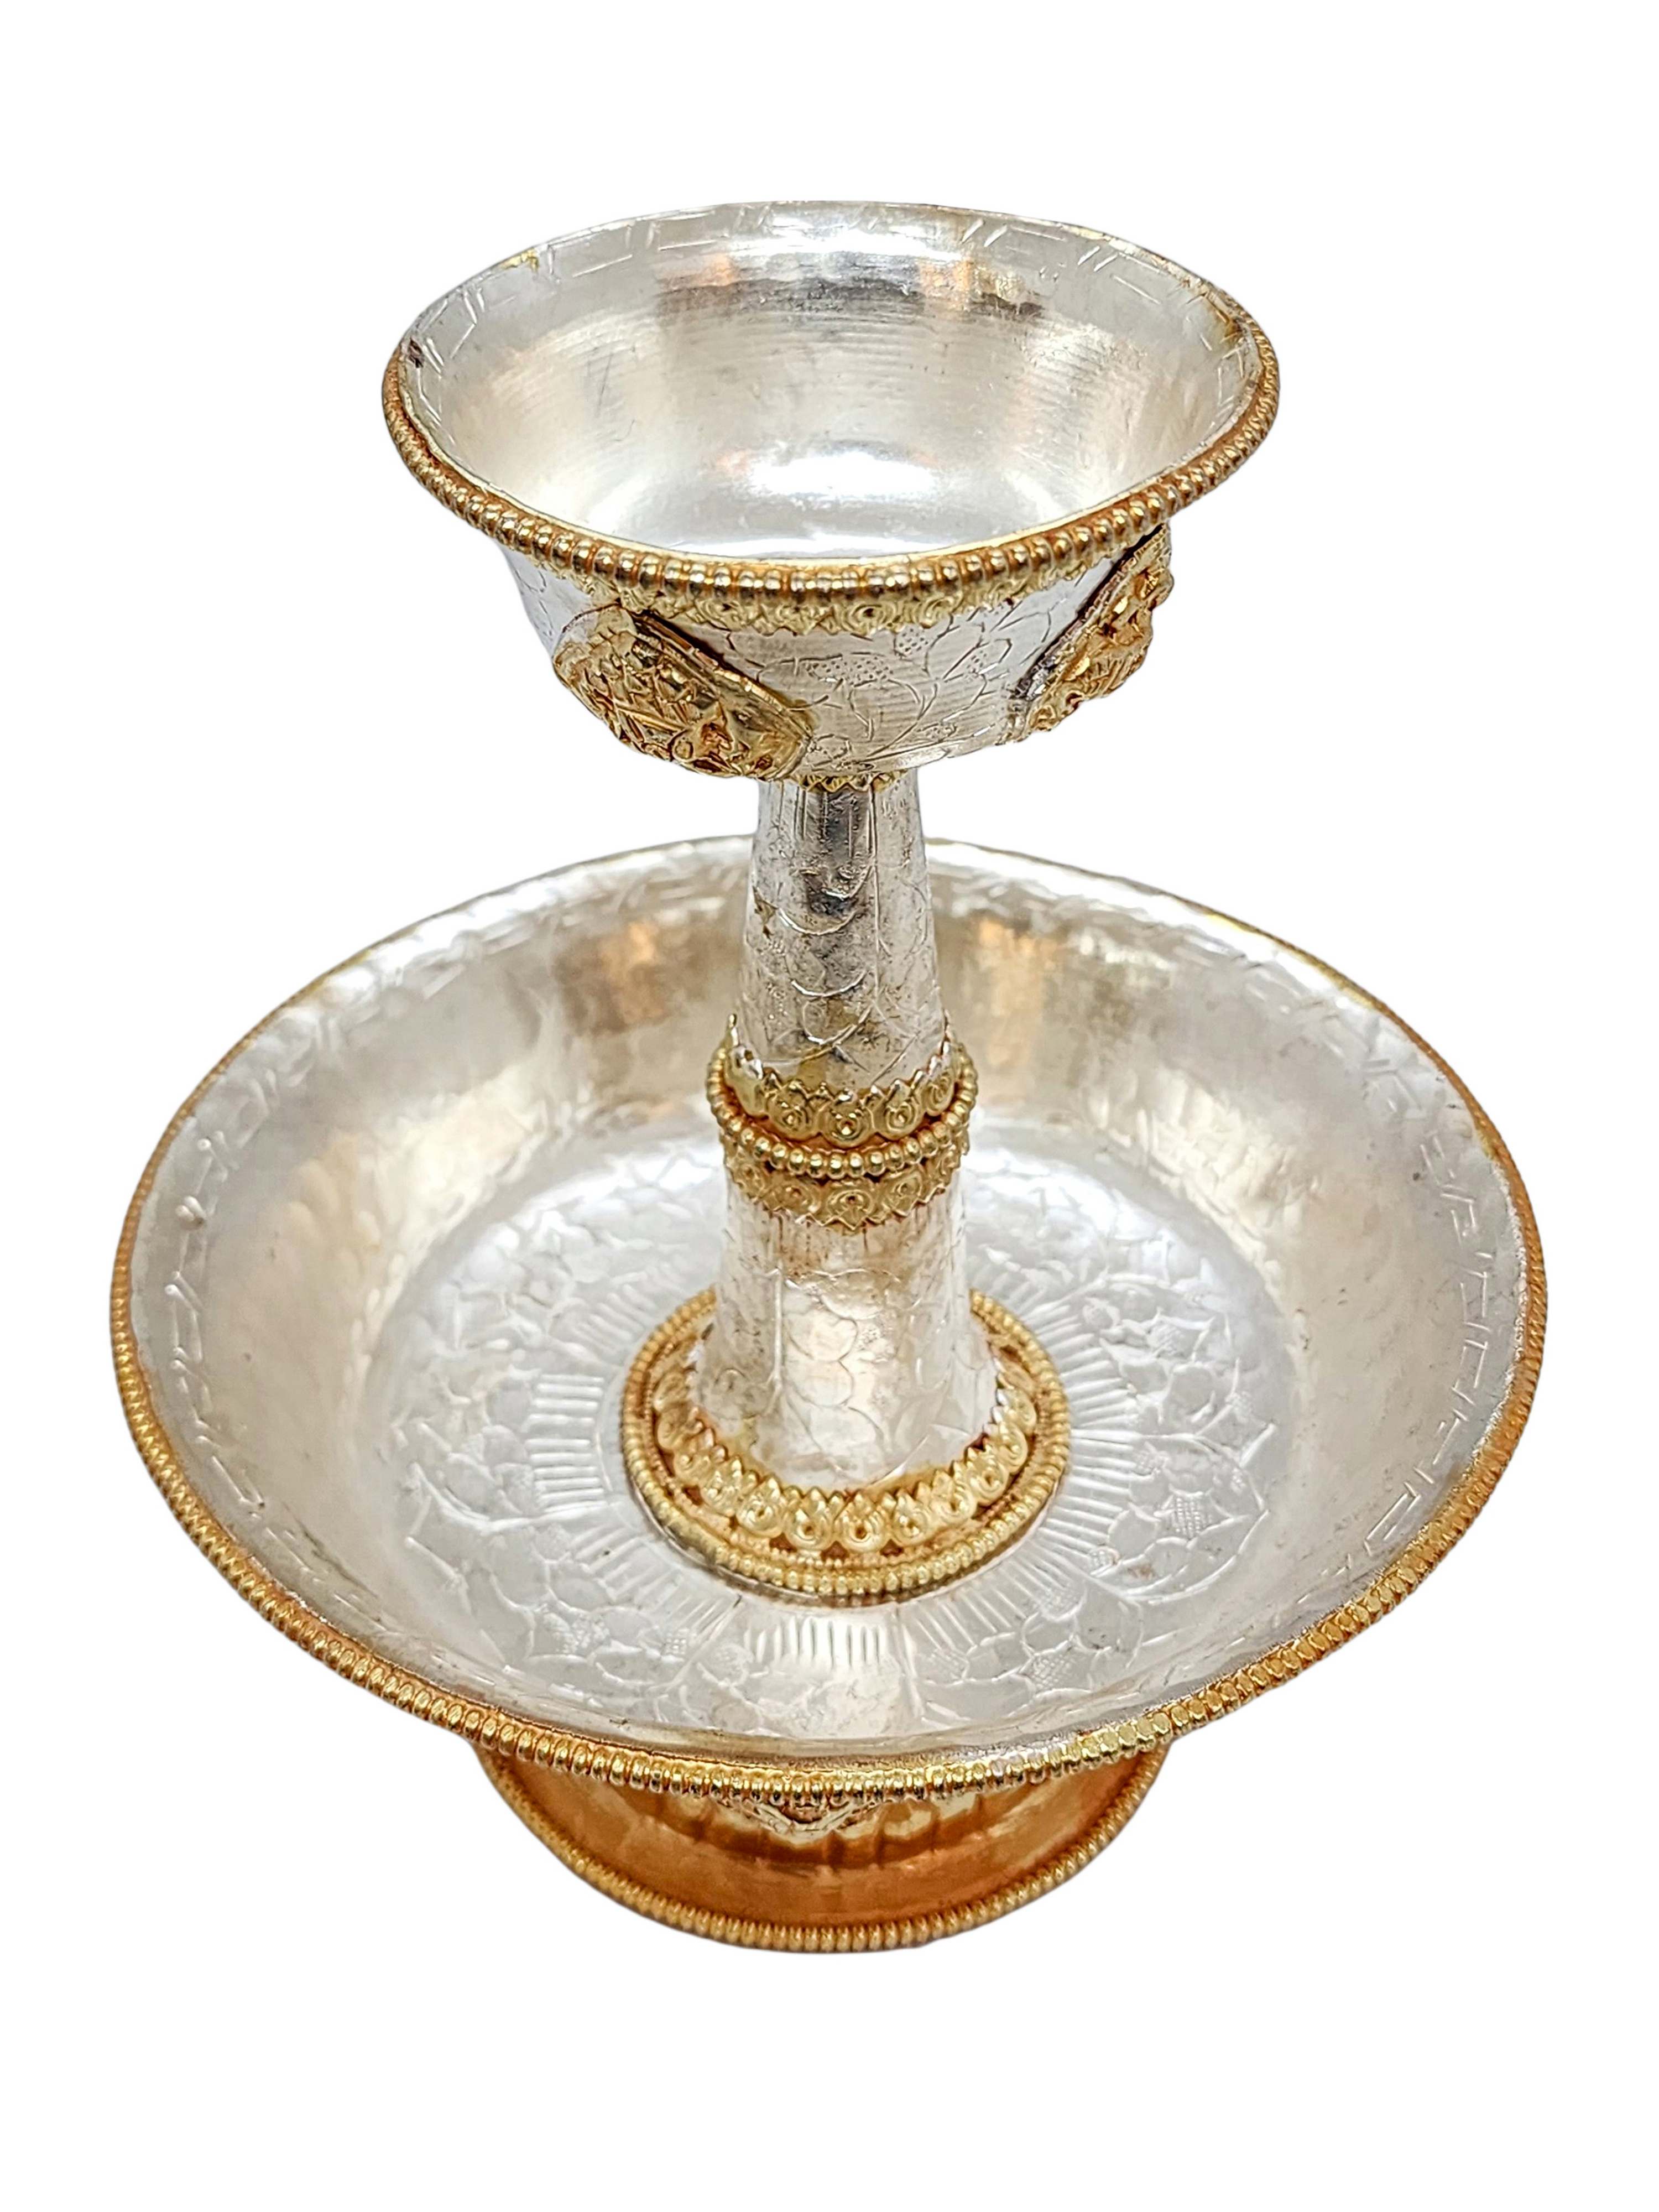 serkyem Offering Or The Golden Drink Offering gold And Silver Plated, aka Sergem, Sirkim